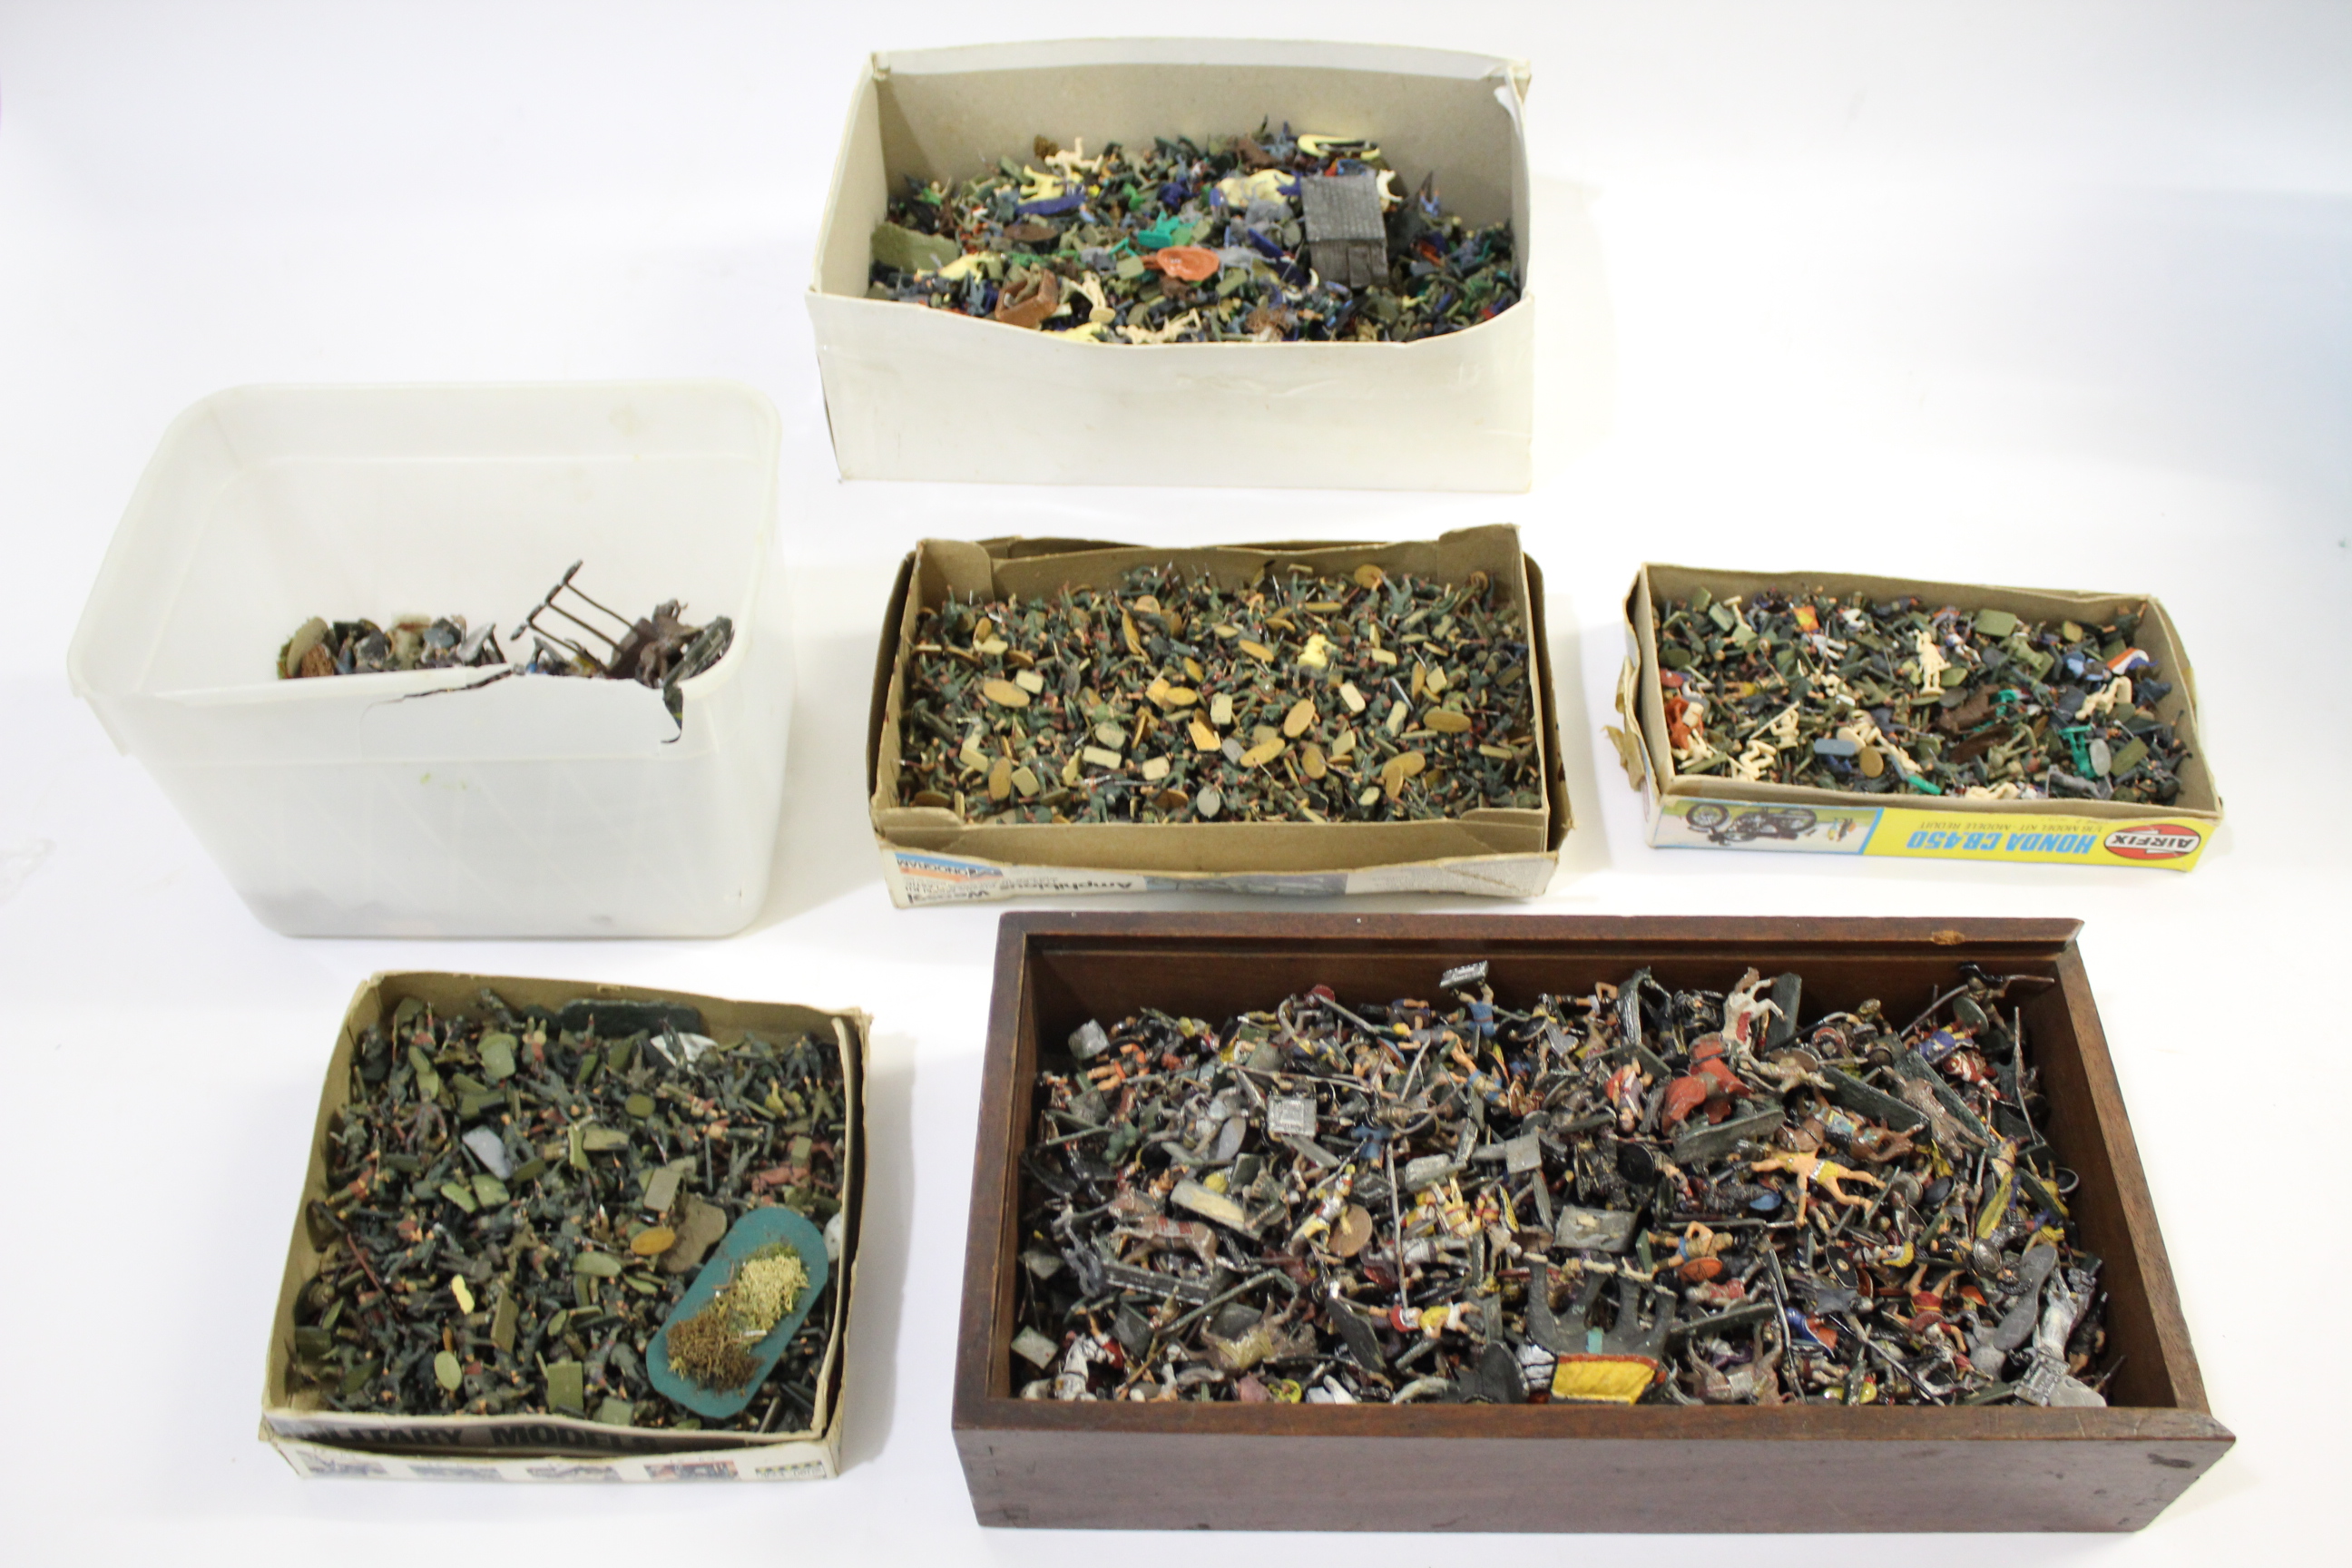 LARGE QTY OF WAR GAMES FIGURES & MILITARY FIGURES including a large qty of metal war games figures